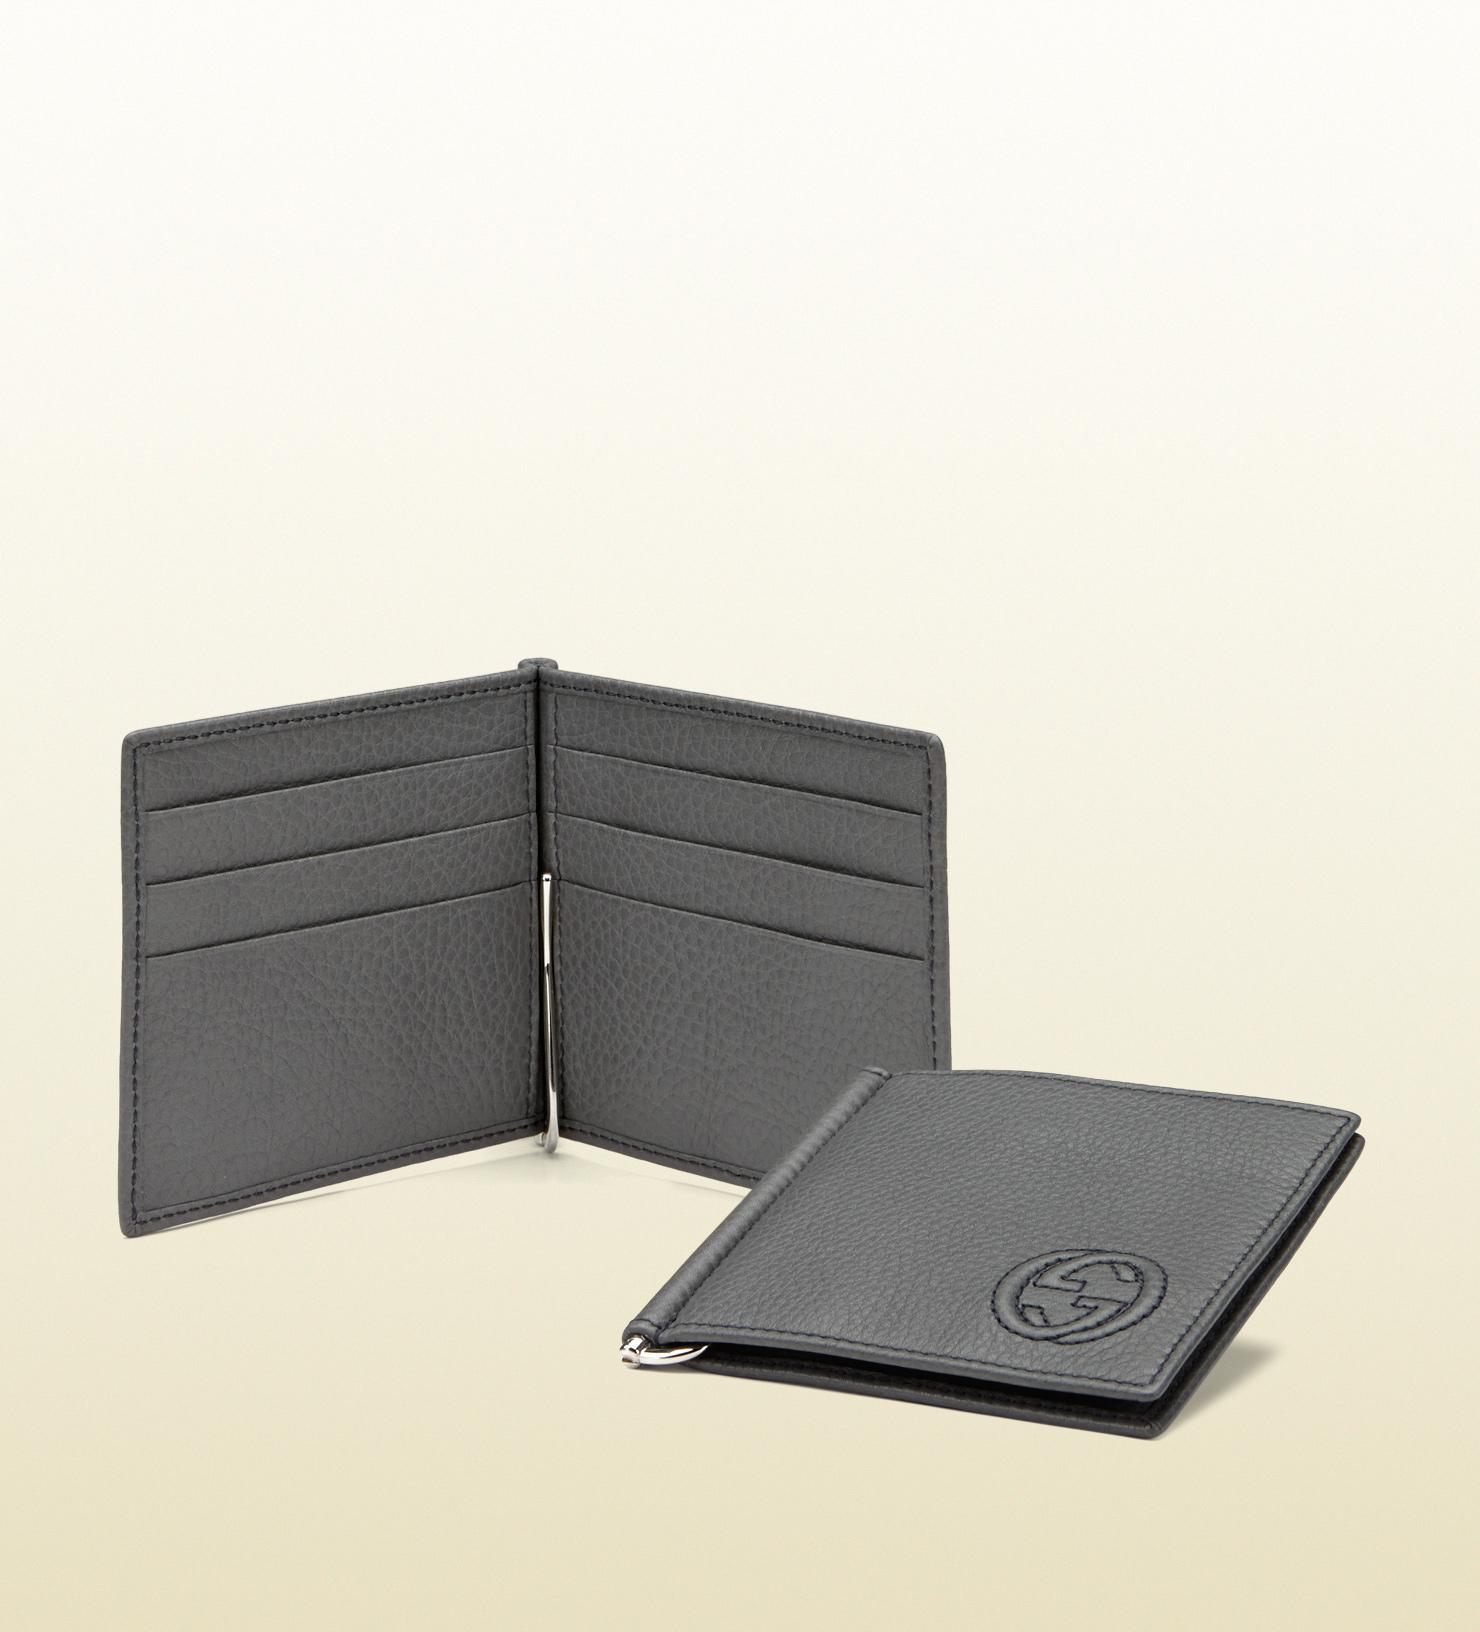 Lyst - Gucci Leather Money Clip Wallet in Gray for Men